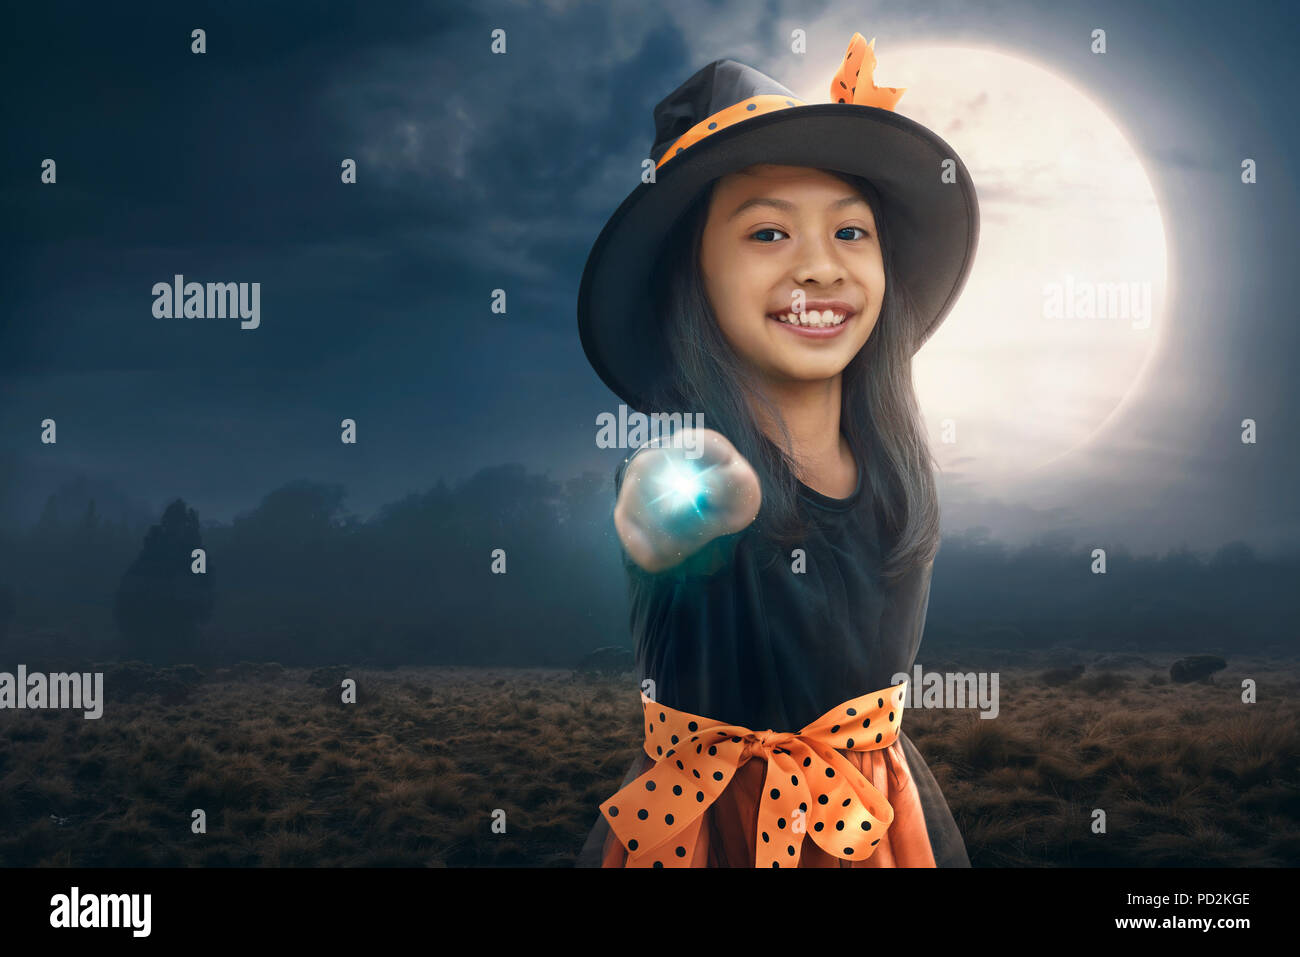 Smiling asian child girl using her magic power with moonlight background Stock Photo